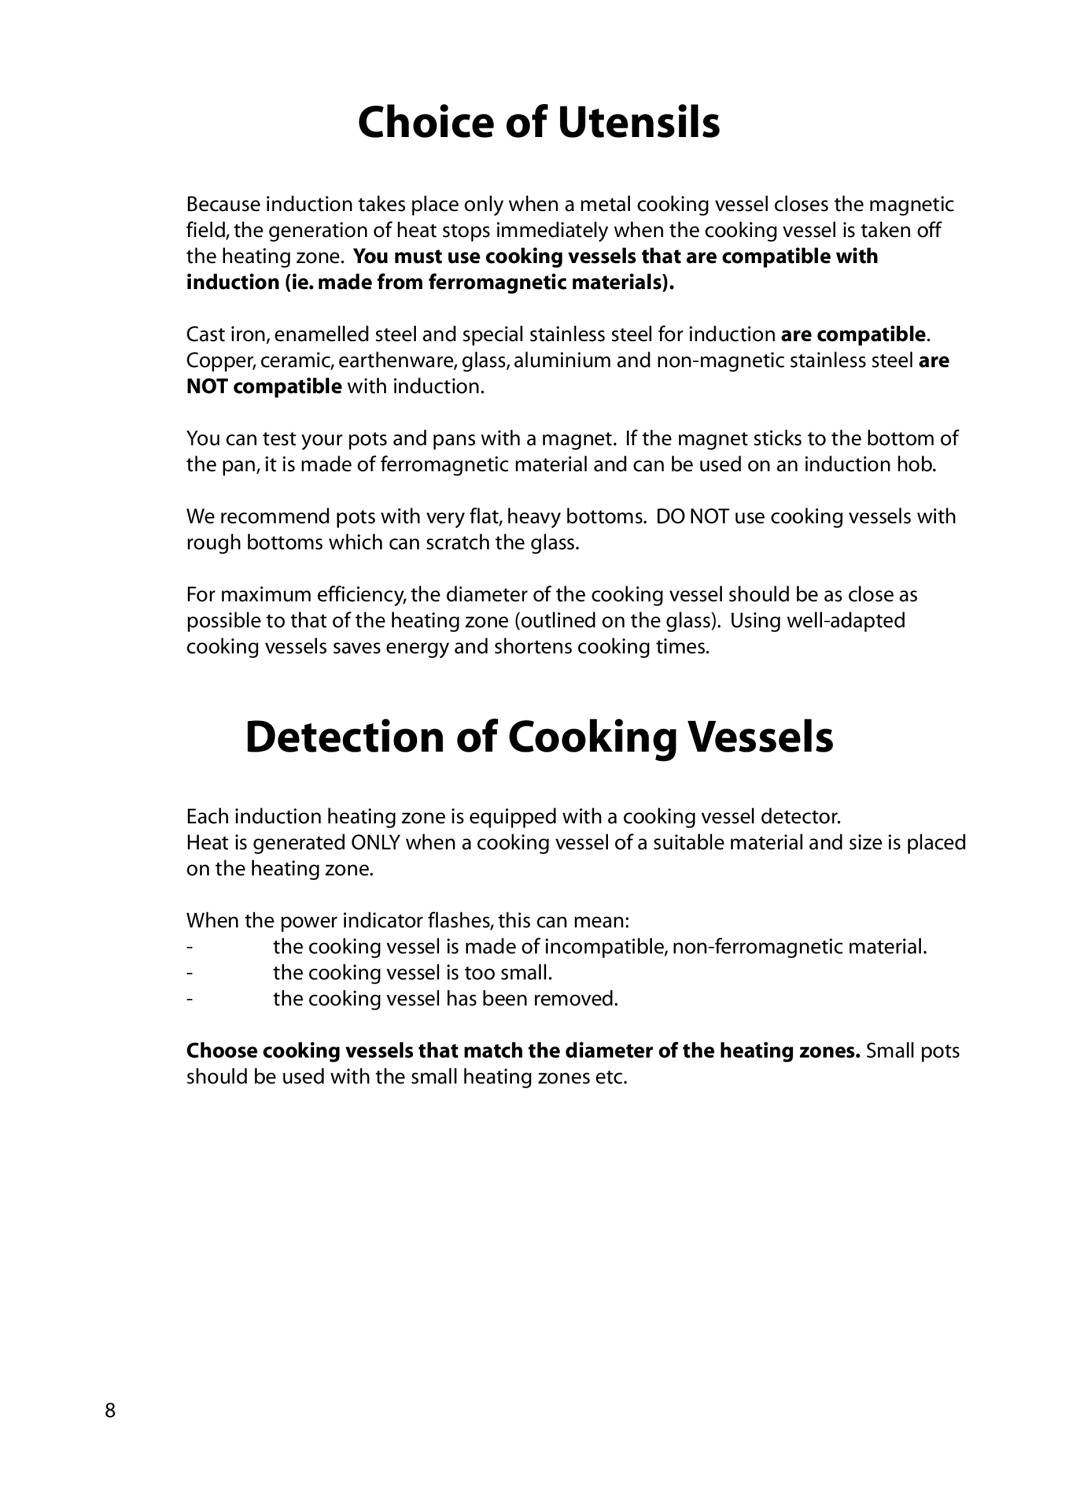 Hotpoint BE82 manual Detection of Cooking Vessels, Choice of Utensils 